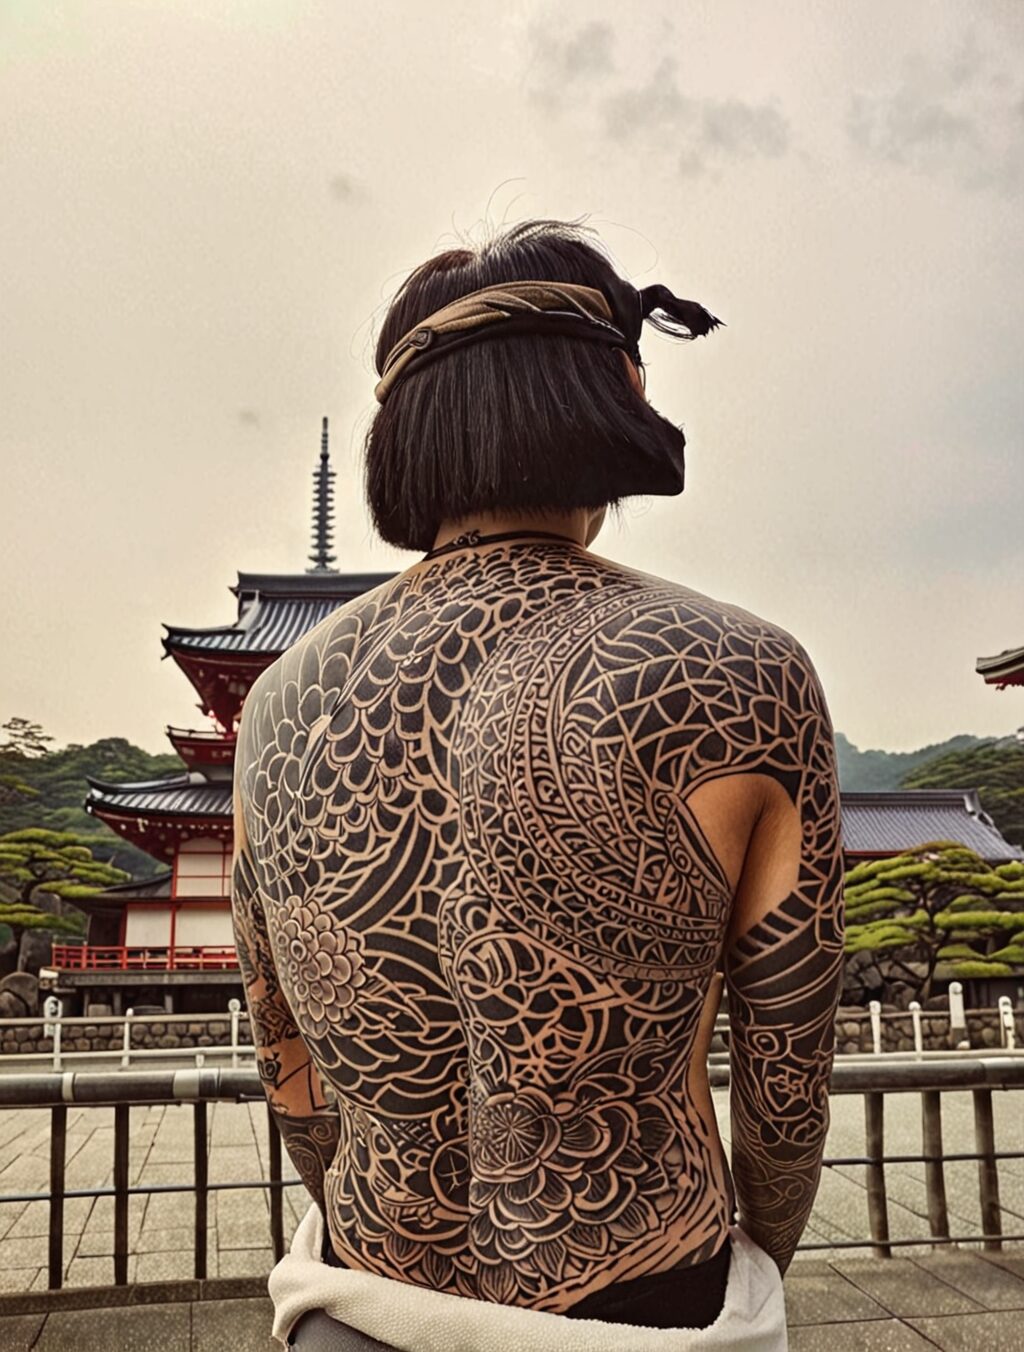 traveling to japan with tattoos reddit